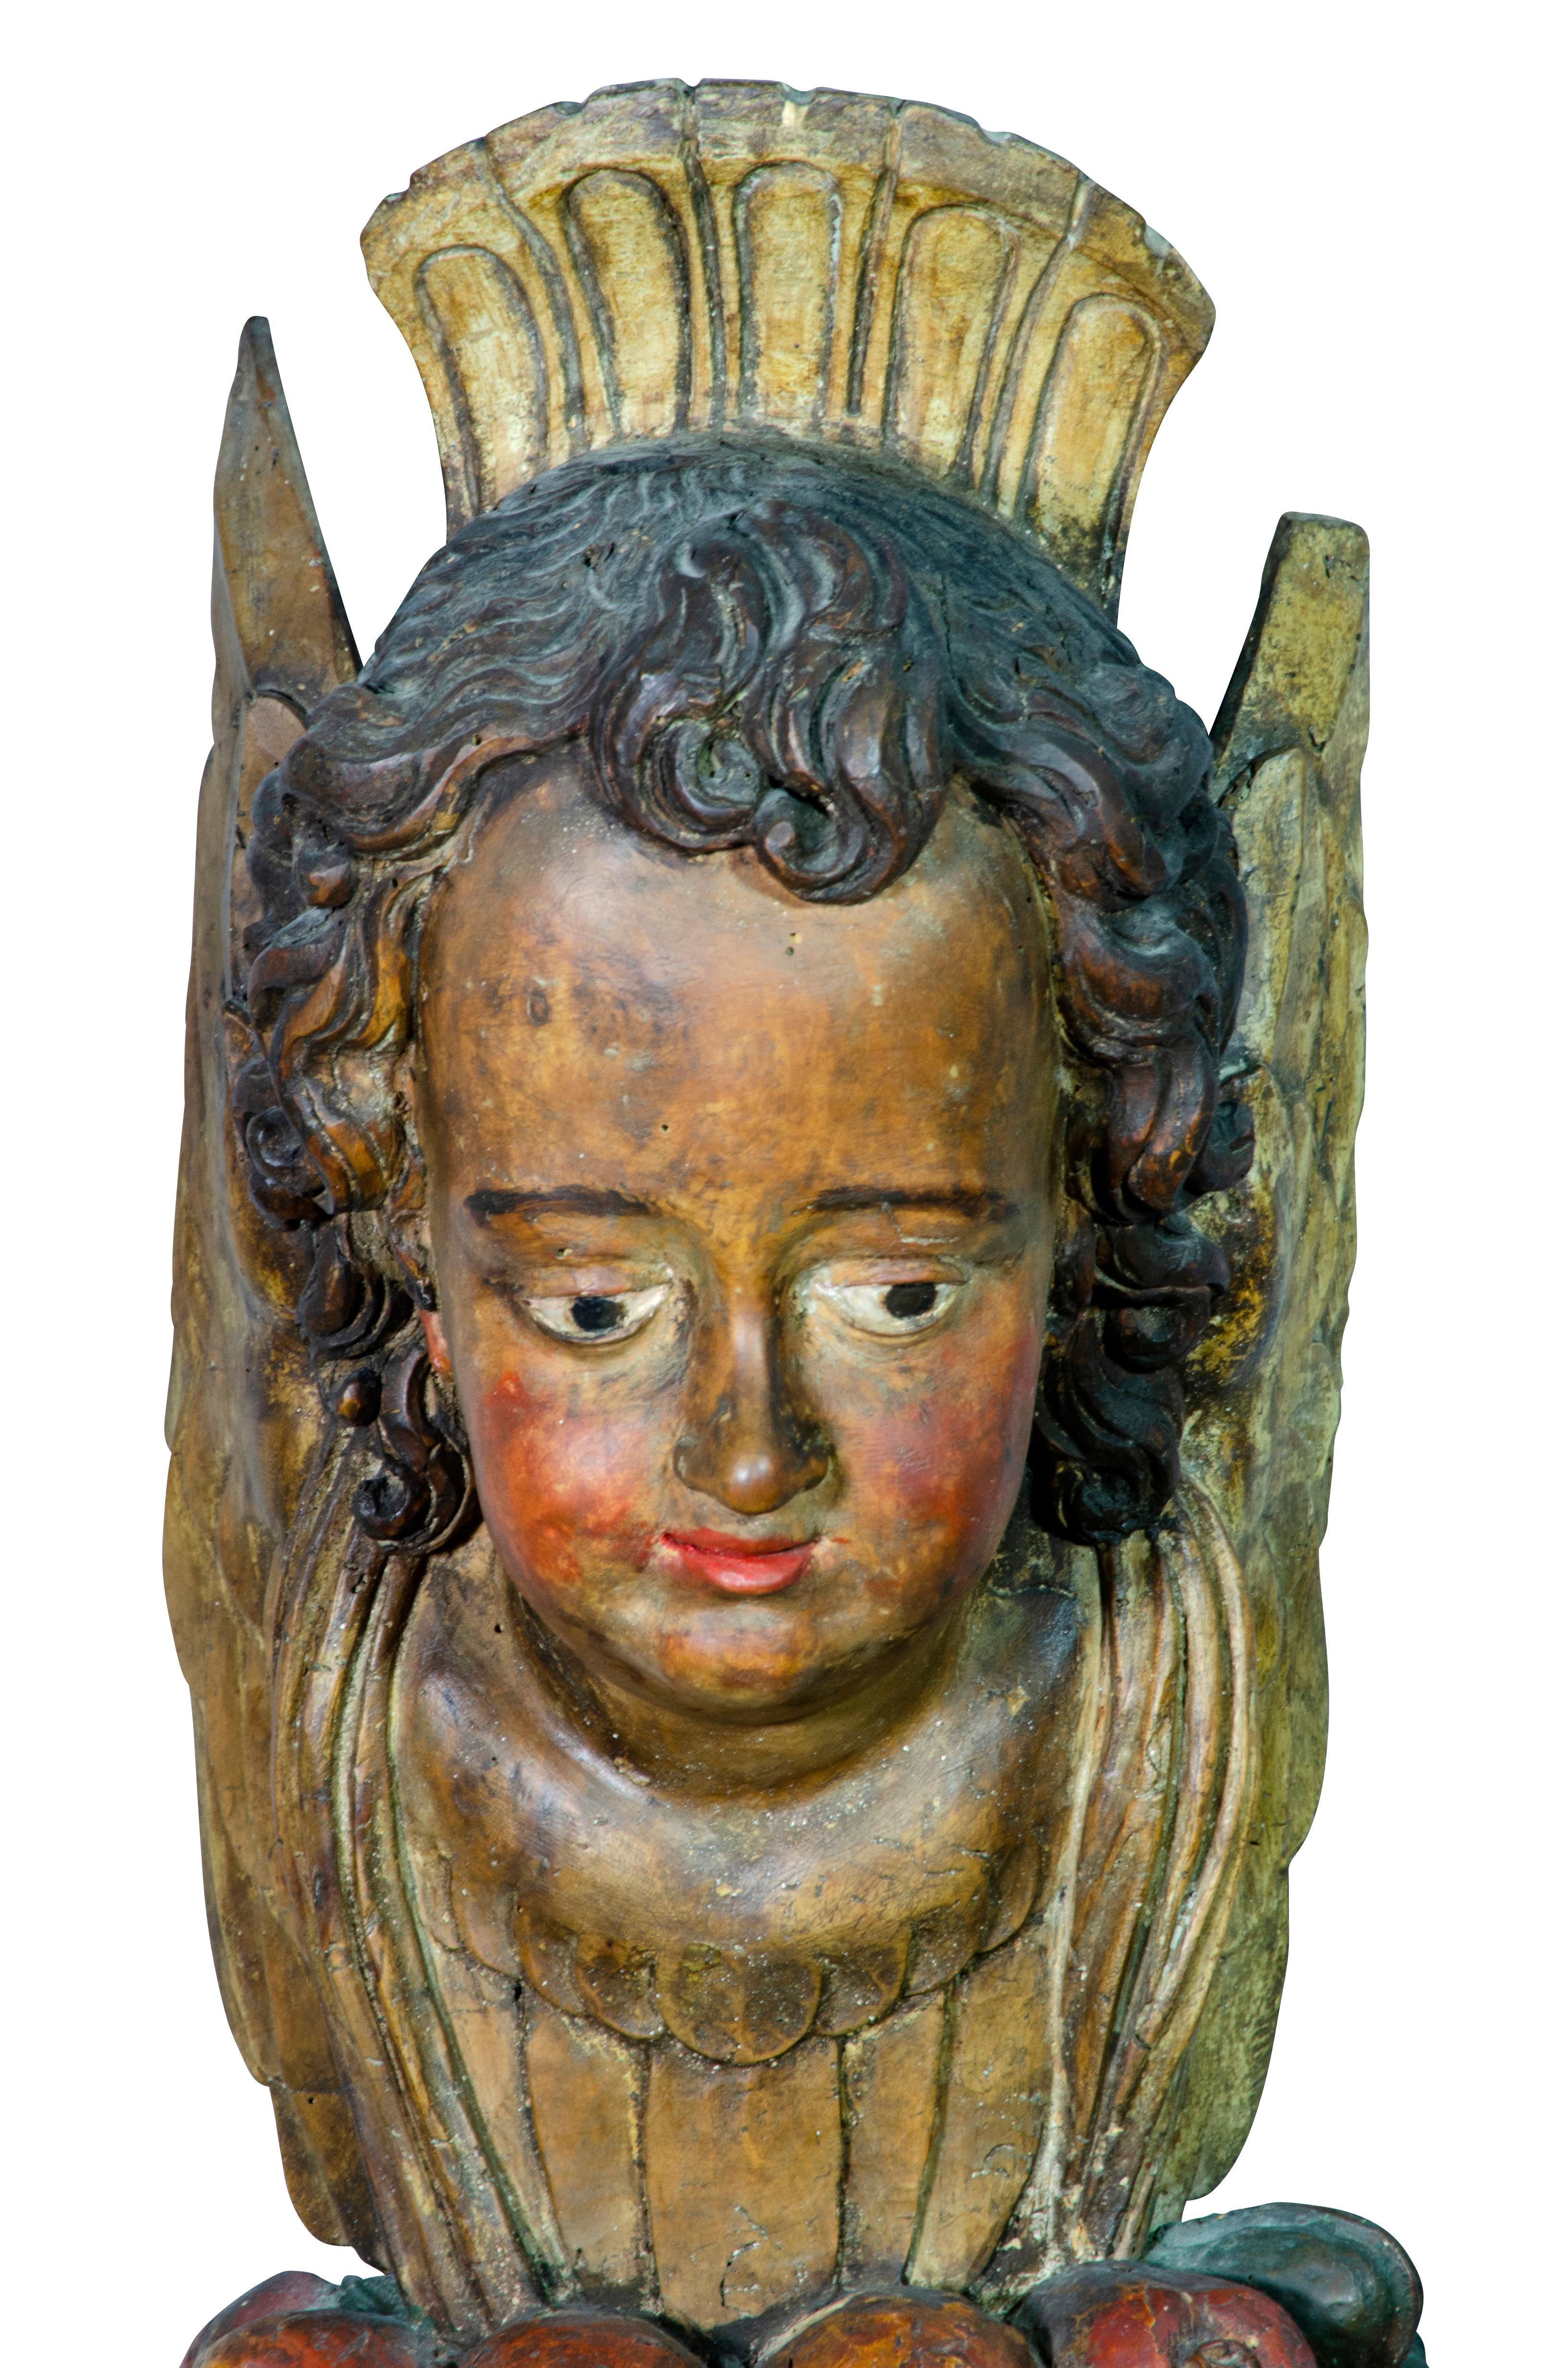 Carved and painted wood figure of a cherubic face and cluster of fruit.